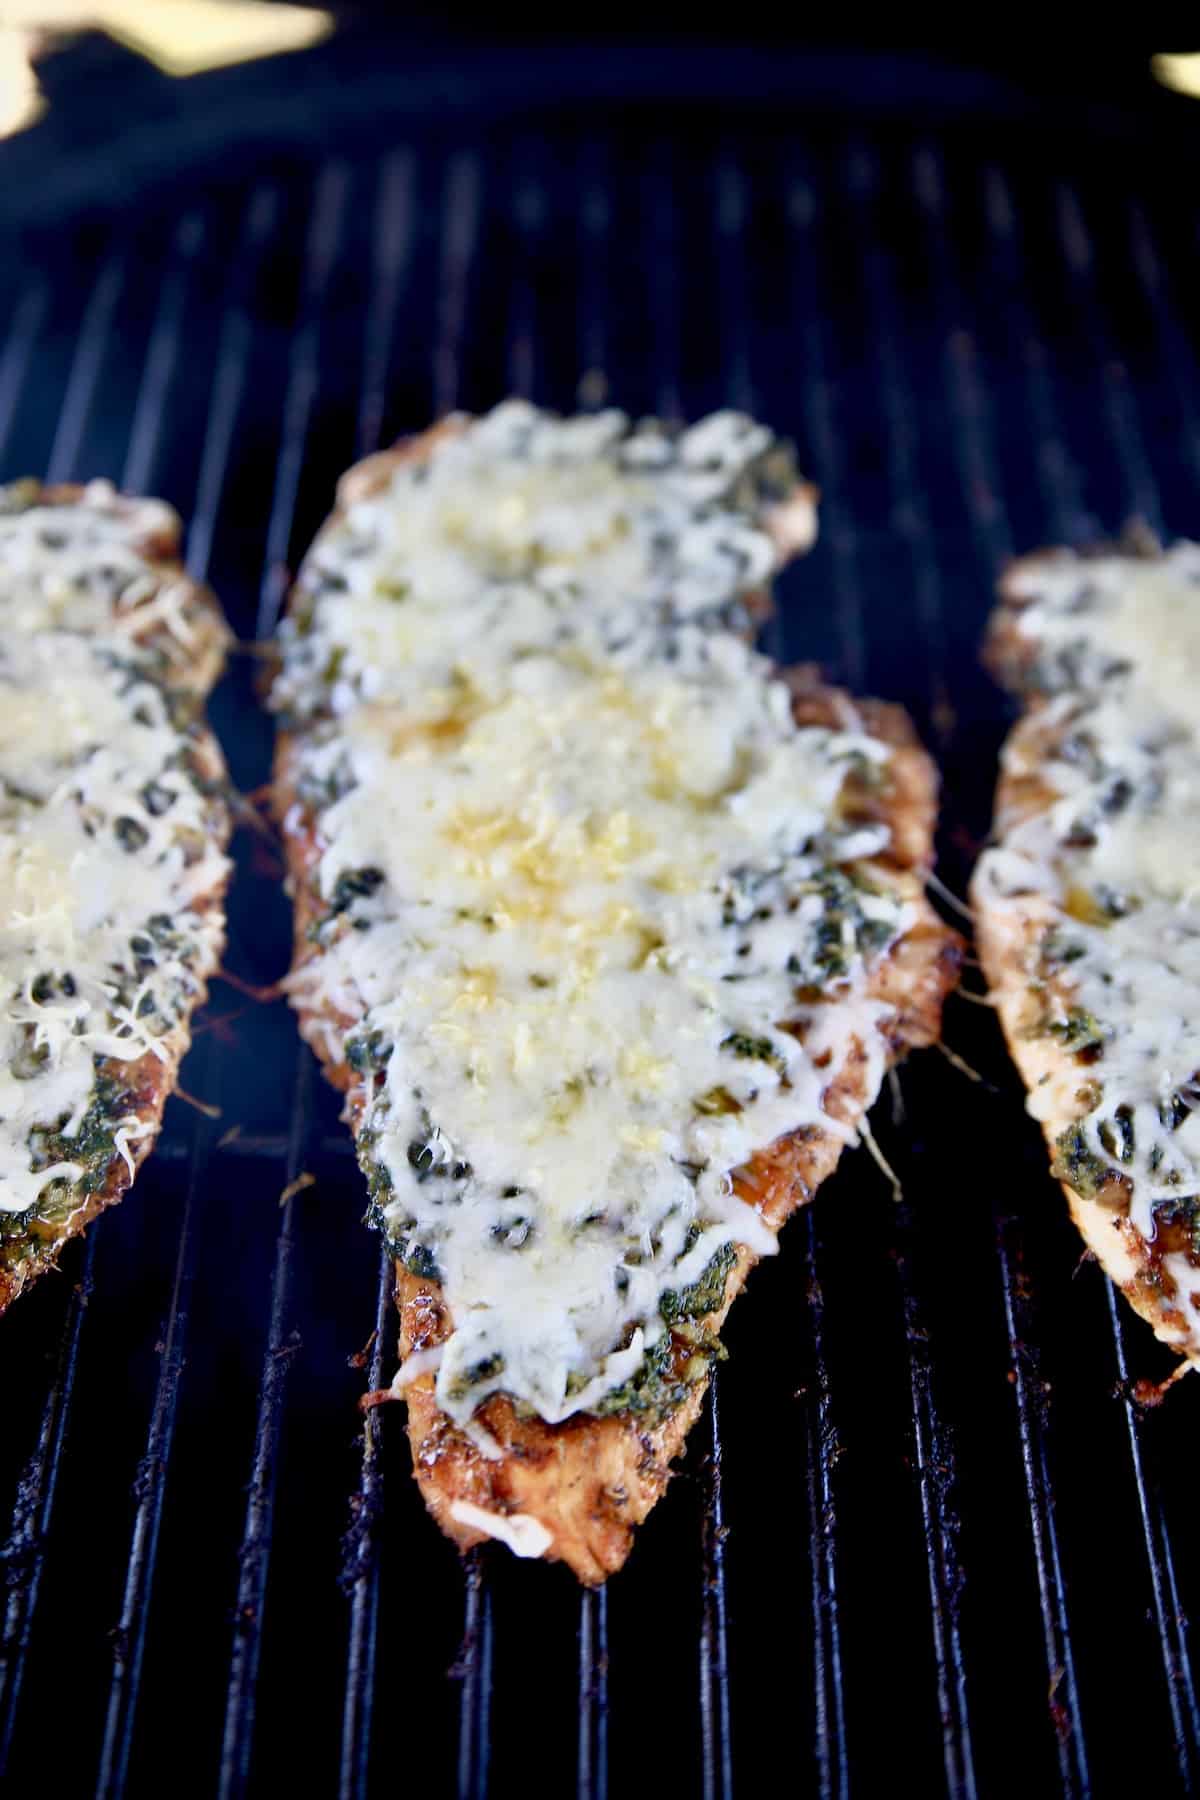 Grilling chicken with cheese melted over the top.